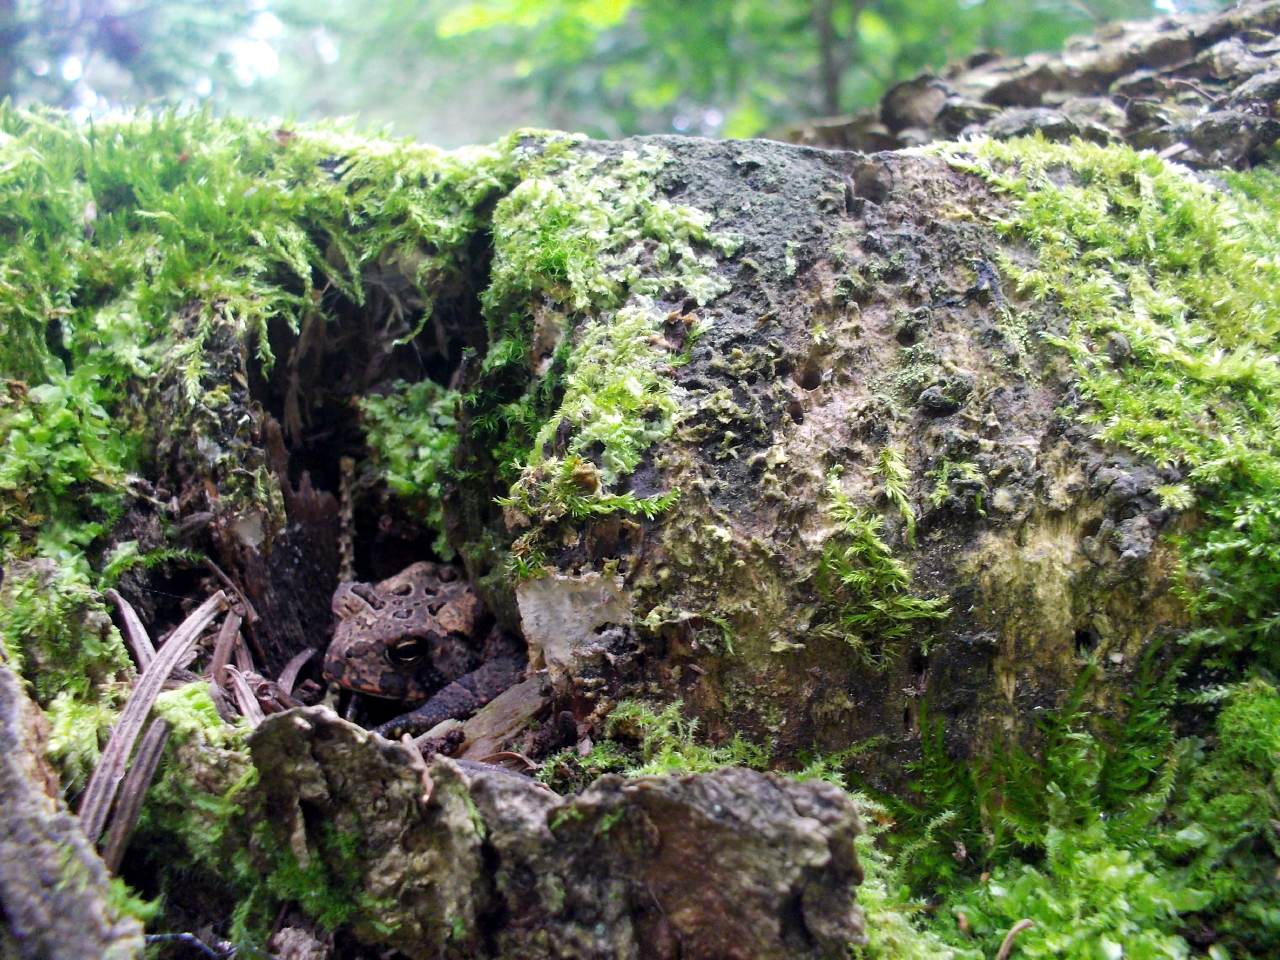 First place Sapphire: “A Mossy Crevice” by Kyra Reed, Age 14.